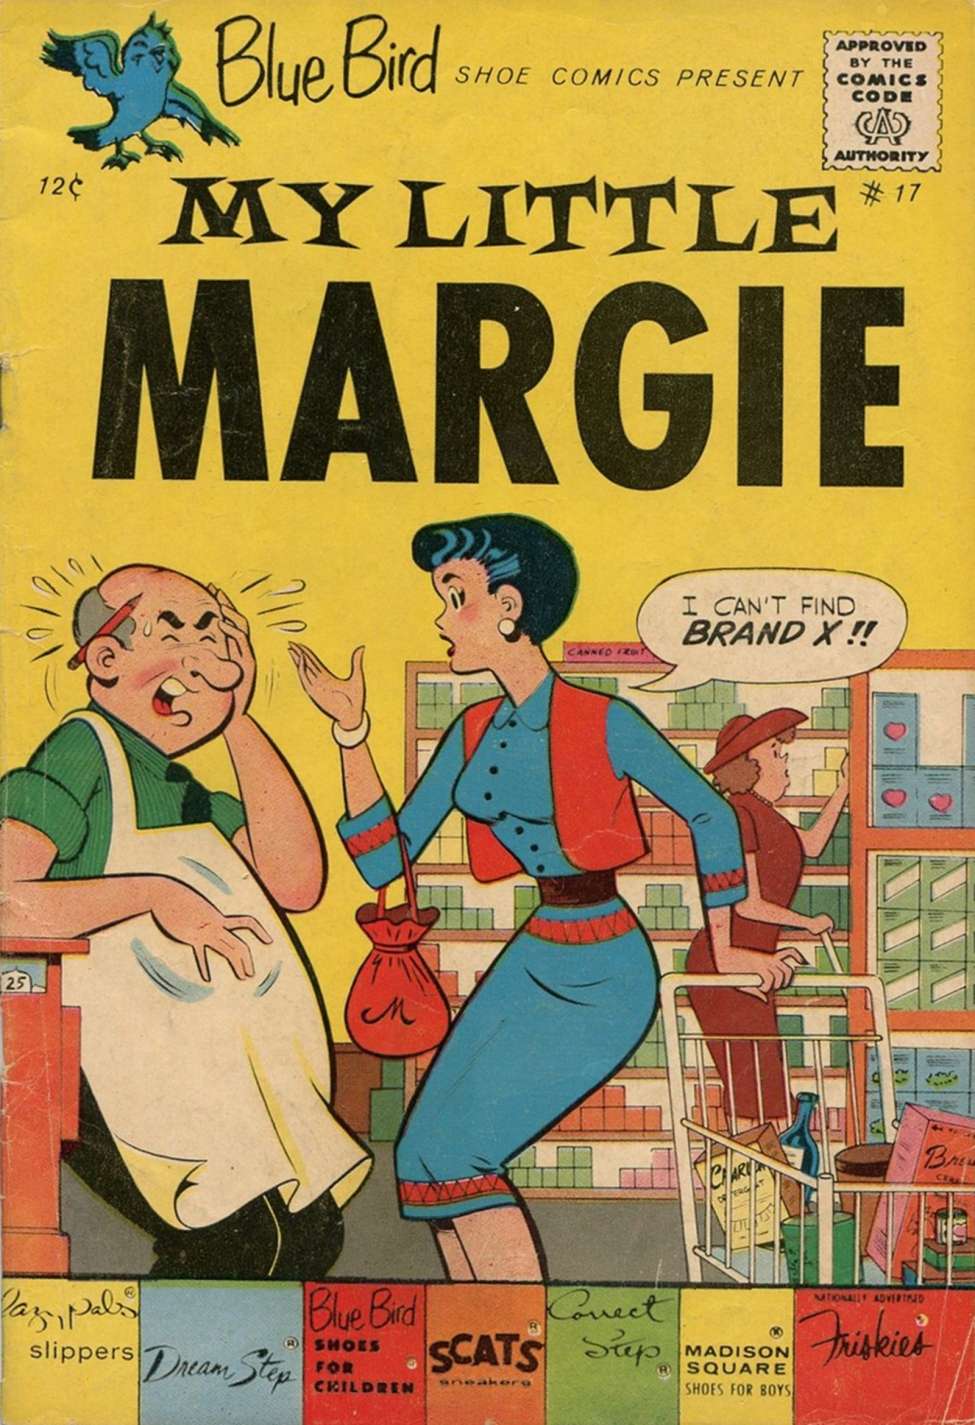 Comic Book Cover For My Little Margie 17 (Blue Bird)